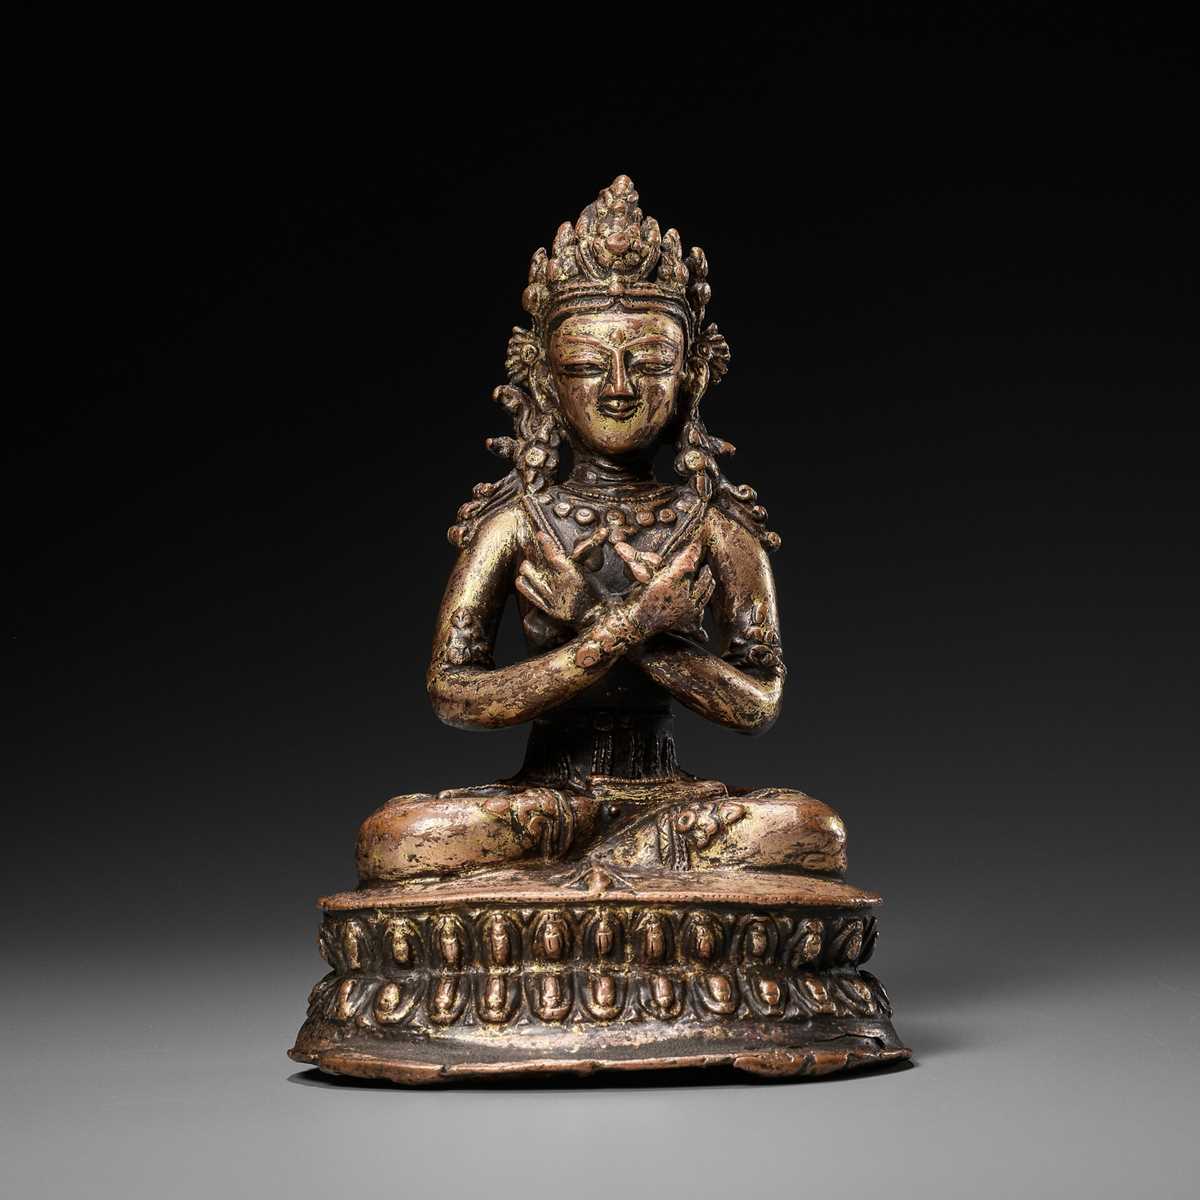 Lot 16 - A GILT COPPER-ALLOY FIGURE OF VAJRADHARA, 15th-16TH CENTURY OR EARLIER